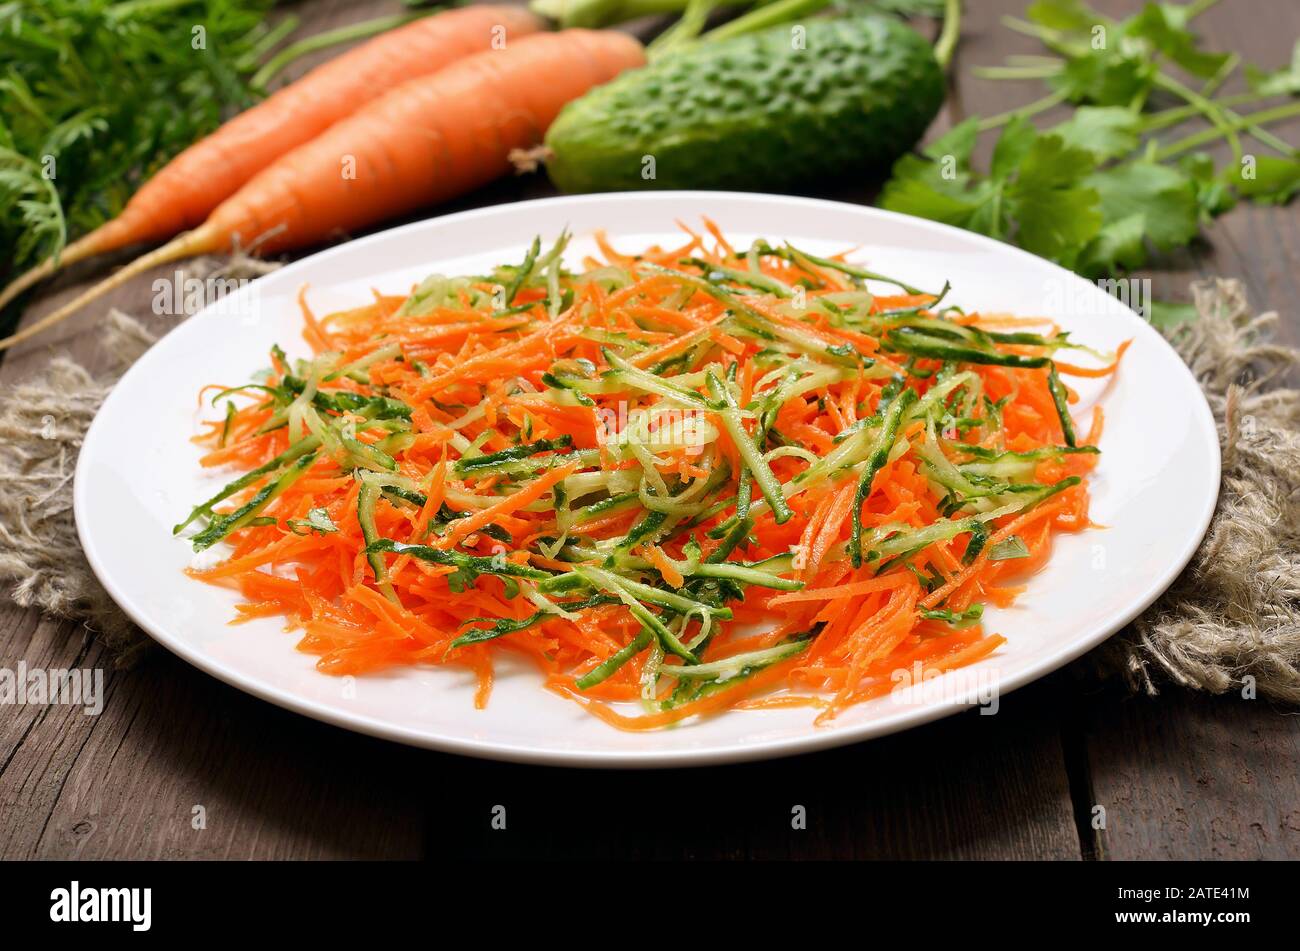 Vegetables salad with carrot and cucumber on white plate Stock Photo